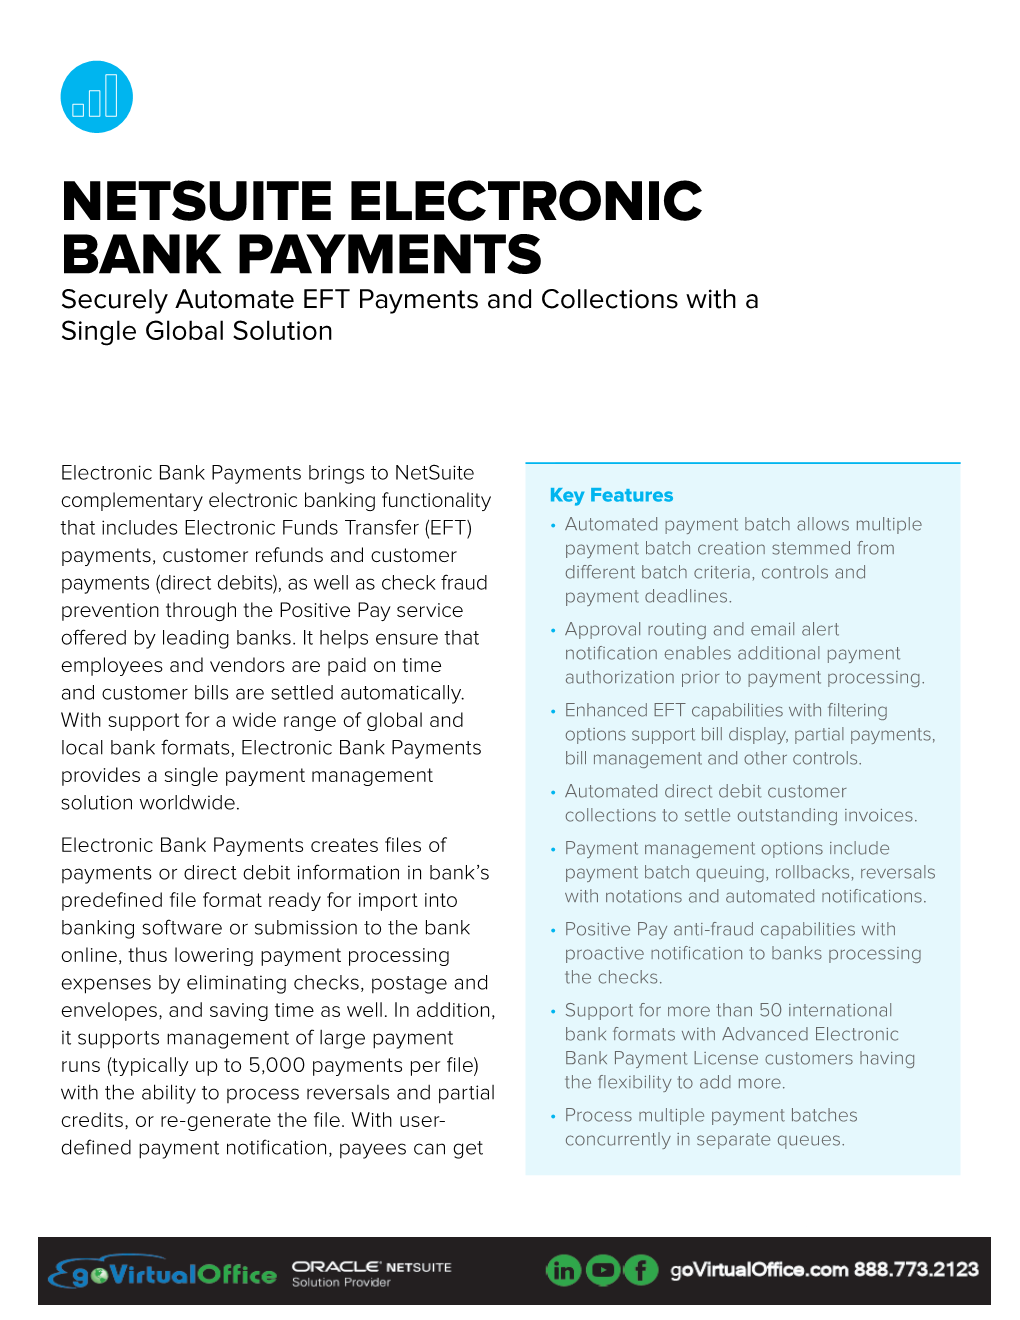 NETSUITE ELECTRONIC BANK PAYMENTS Securely Automate EFT Payments and Collections with a Single Global Solution